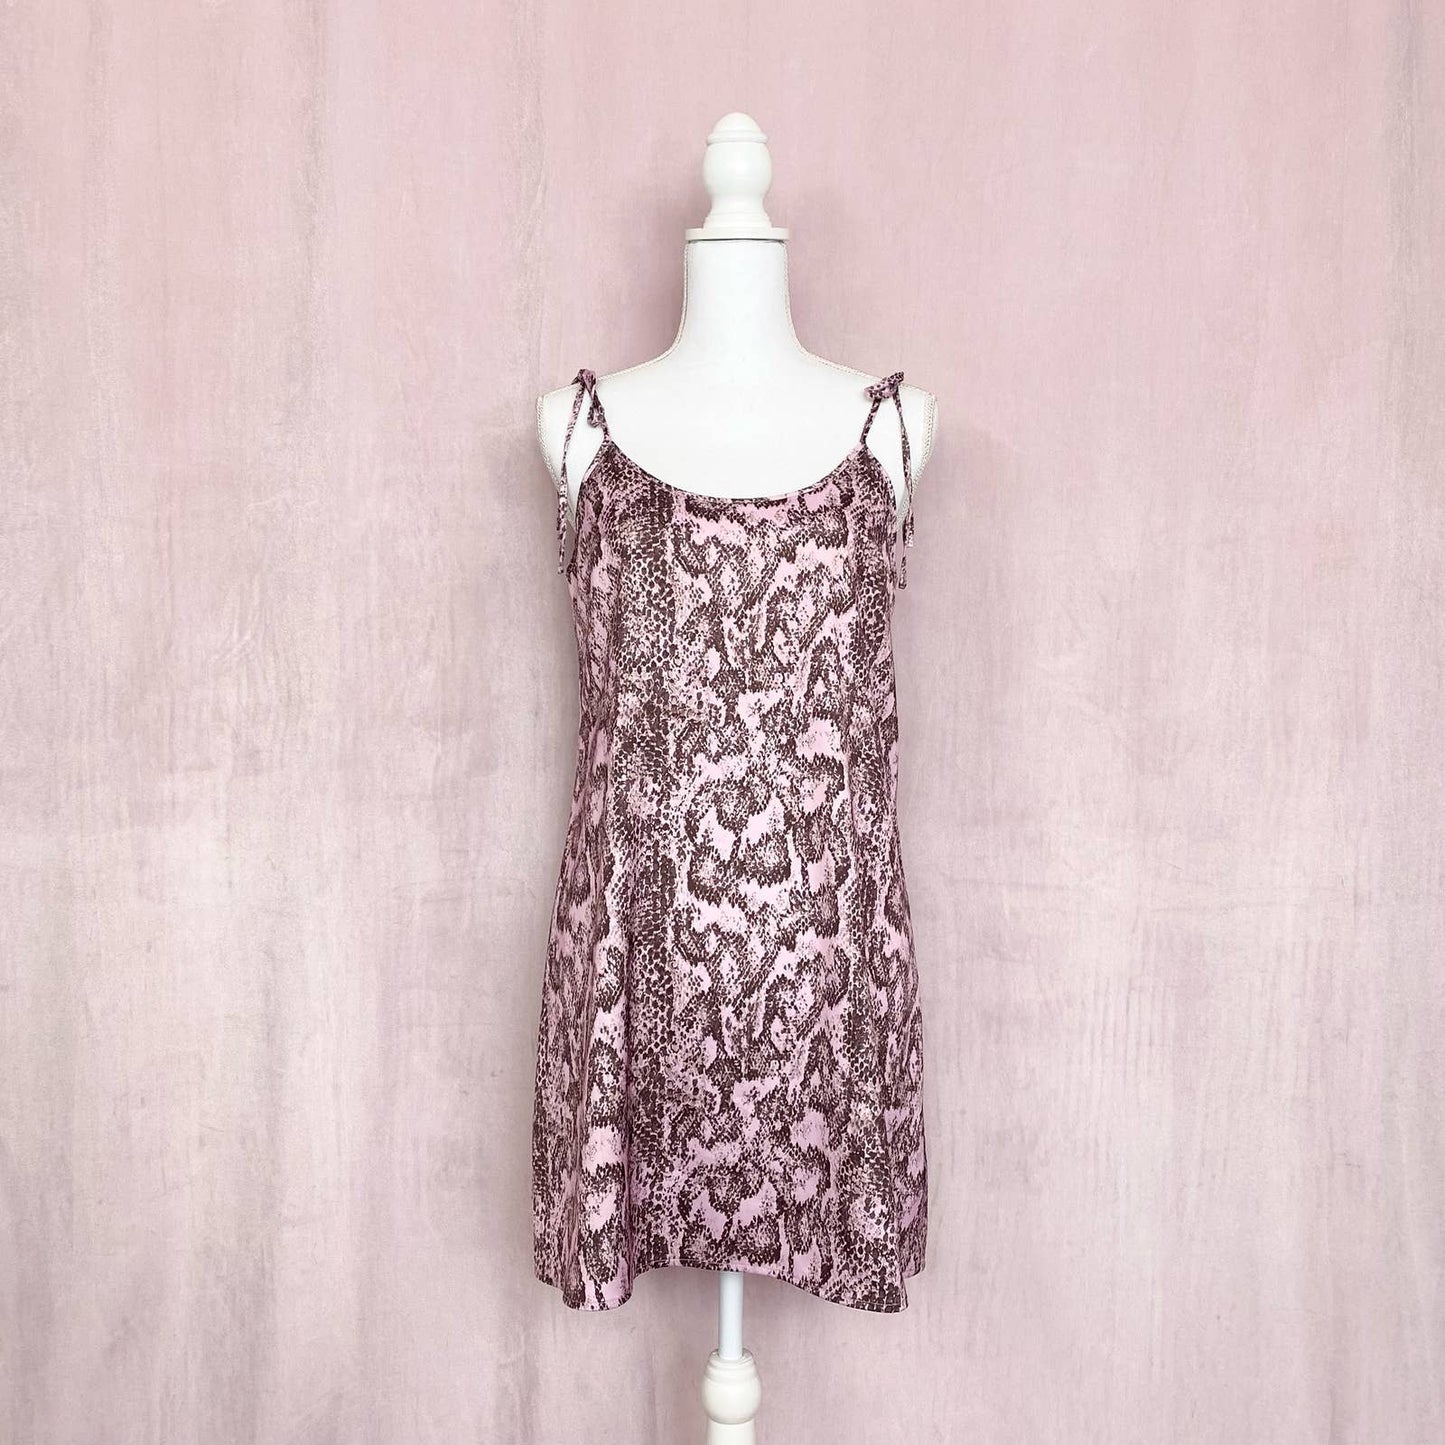 Secondhand Urban Outfitters Pink Snakeskin Mini Slip Dress, Size Small